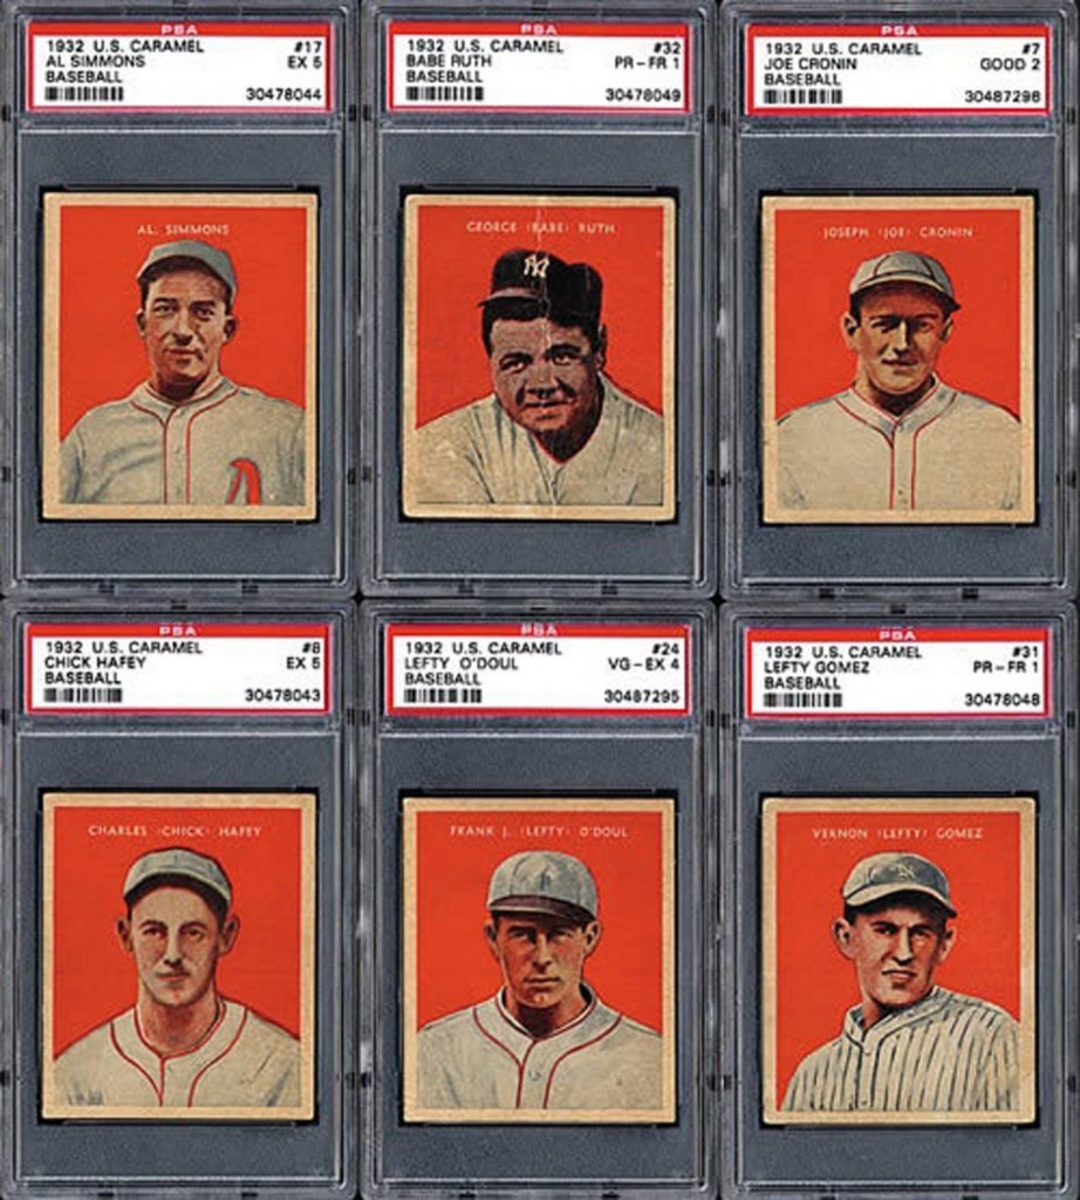 Babe Ruth caps off the 1932-33 U.S. Caramel set, but the other 26 baseball players in the set aren’t too shabby either. 